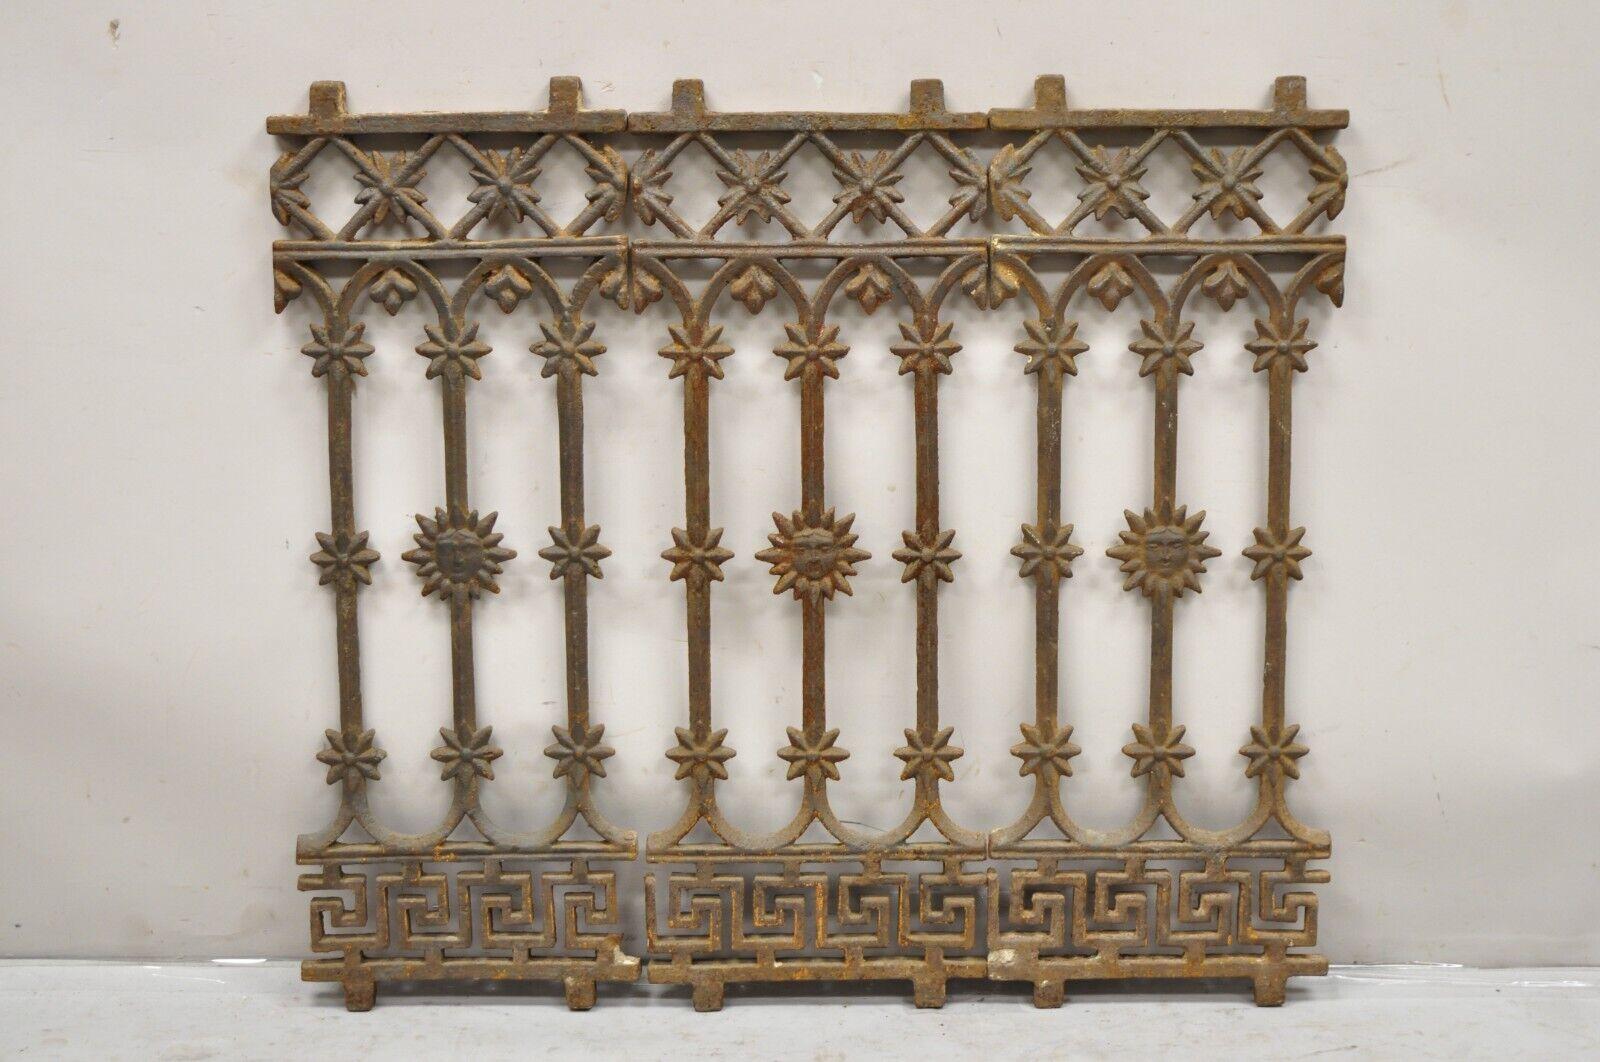 Antique Cast Iron Victorian Greek Key Sun Face Garden Fence Gate Decor - Each. Item features. Multiple quantity available. Price is per piece. Each gate approximately 30lbs. Believed to be Early 1900s. Measurements: 32